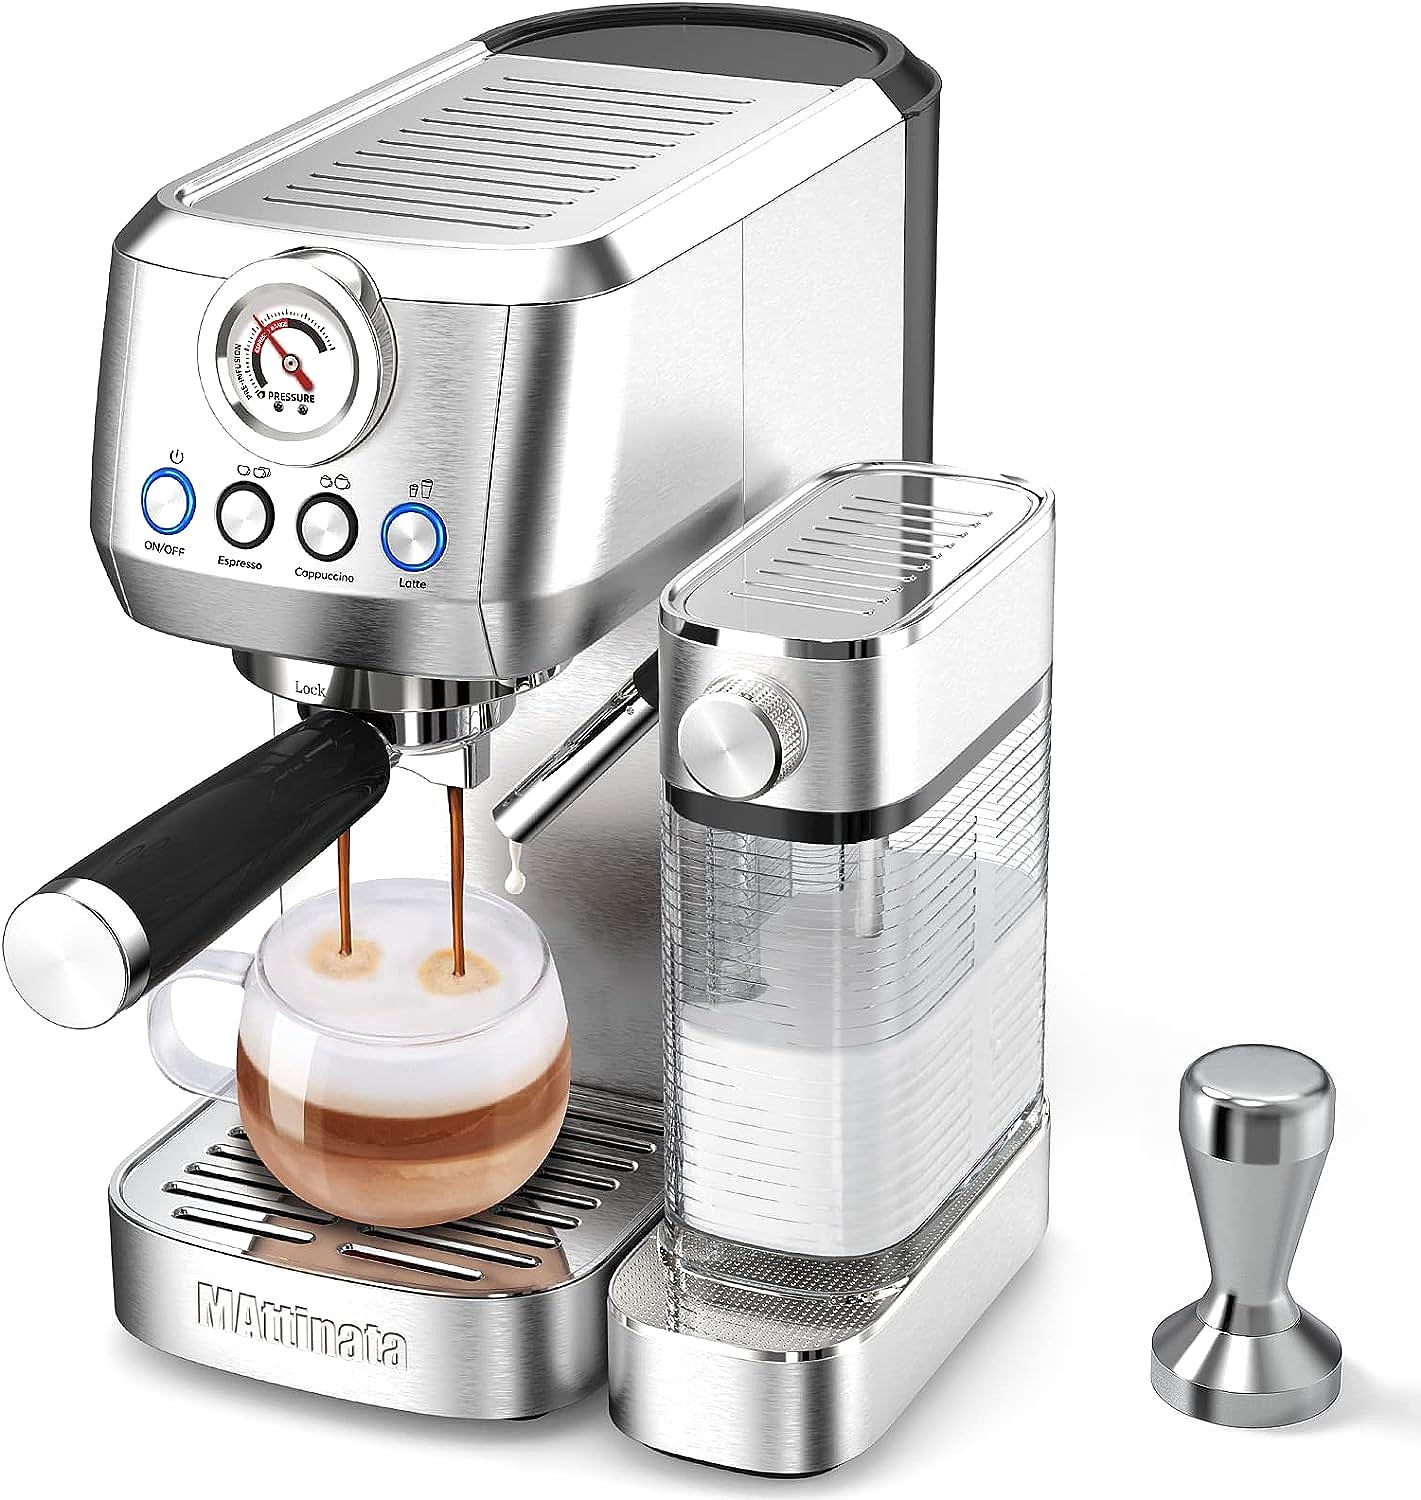 Mattinata CM1633 I' Alba Pro Automatic Milk Frothing Espresso Machine - Review of an Affordable Yet Quality Latte Maker